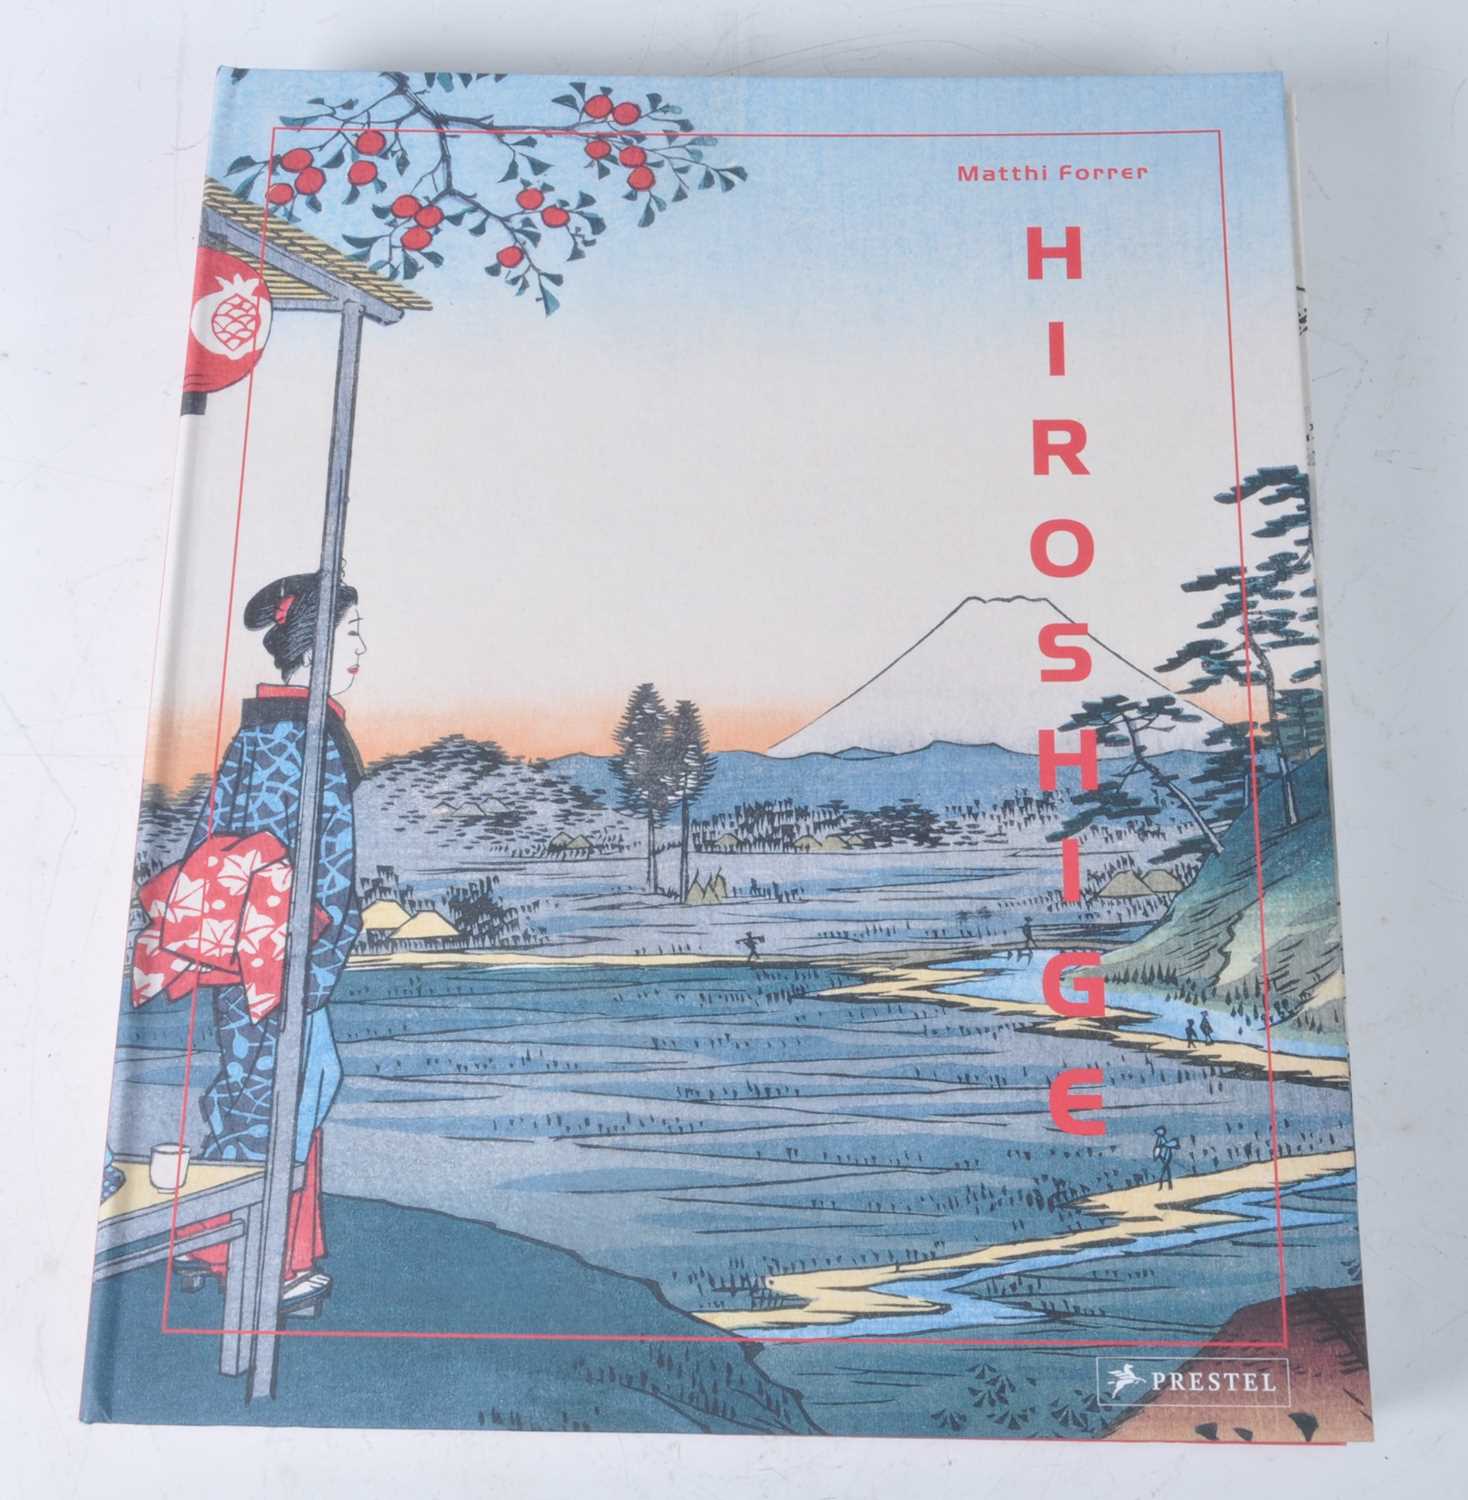 Forrer, Matthi: Hiroshige, Prestel, Munich, London, New York, hardcover with 300 reproductions in